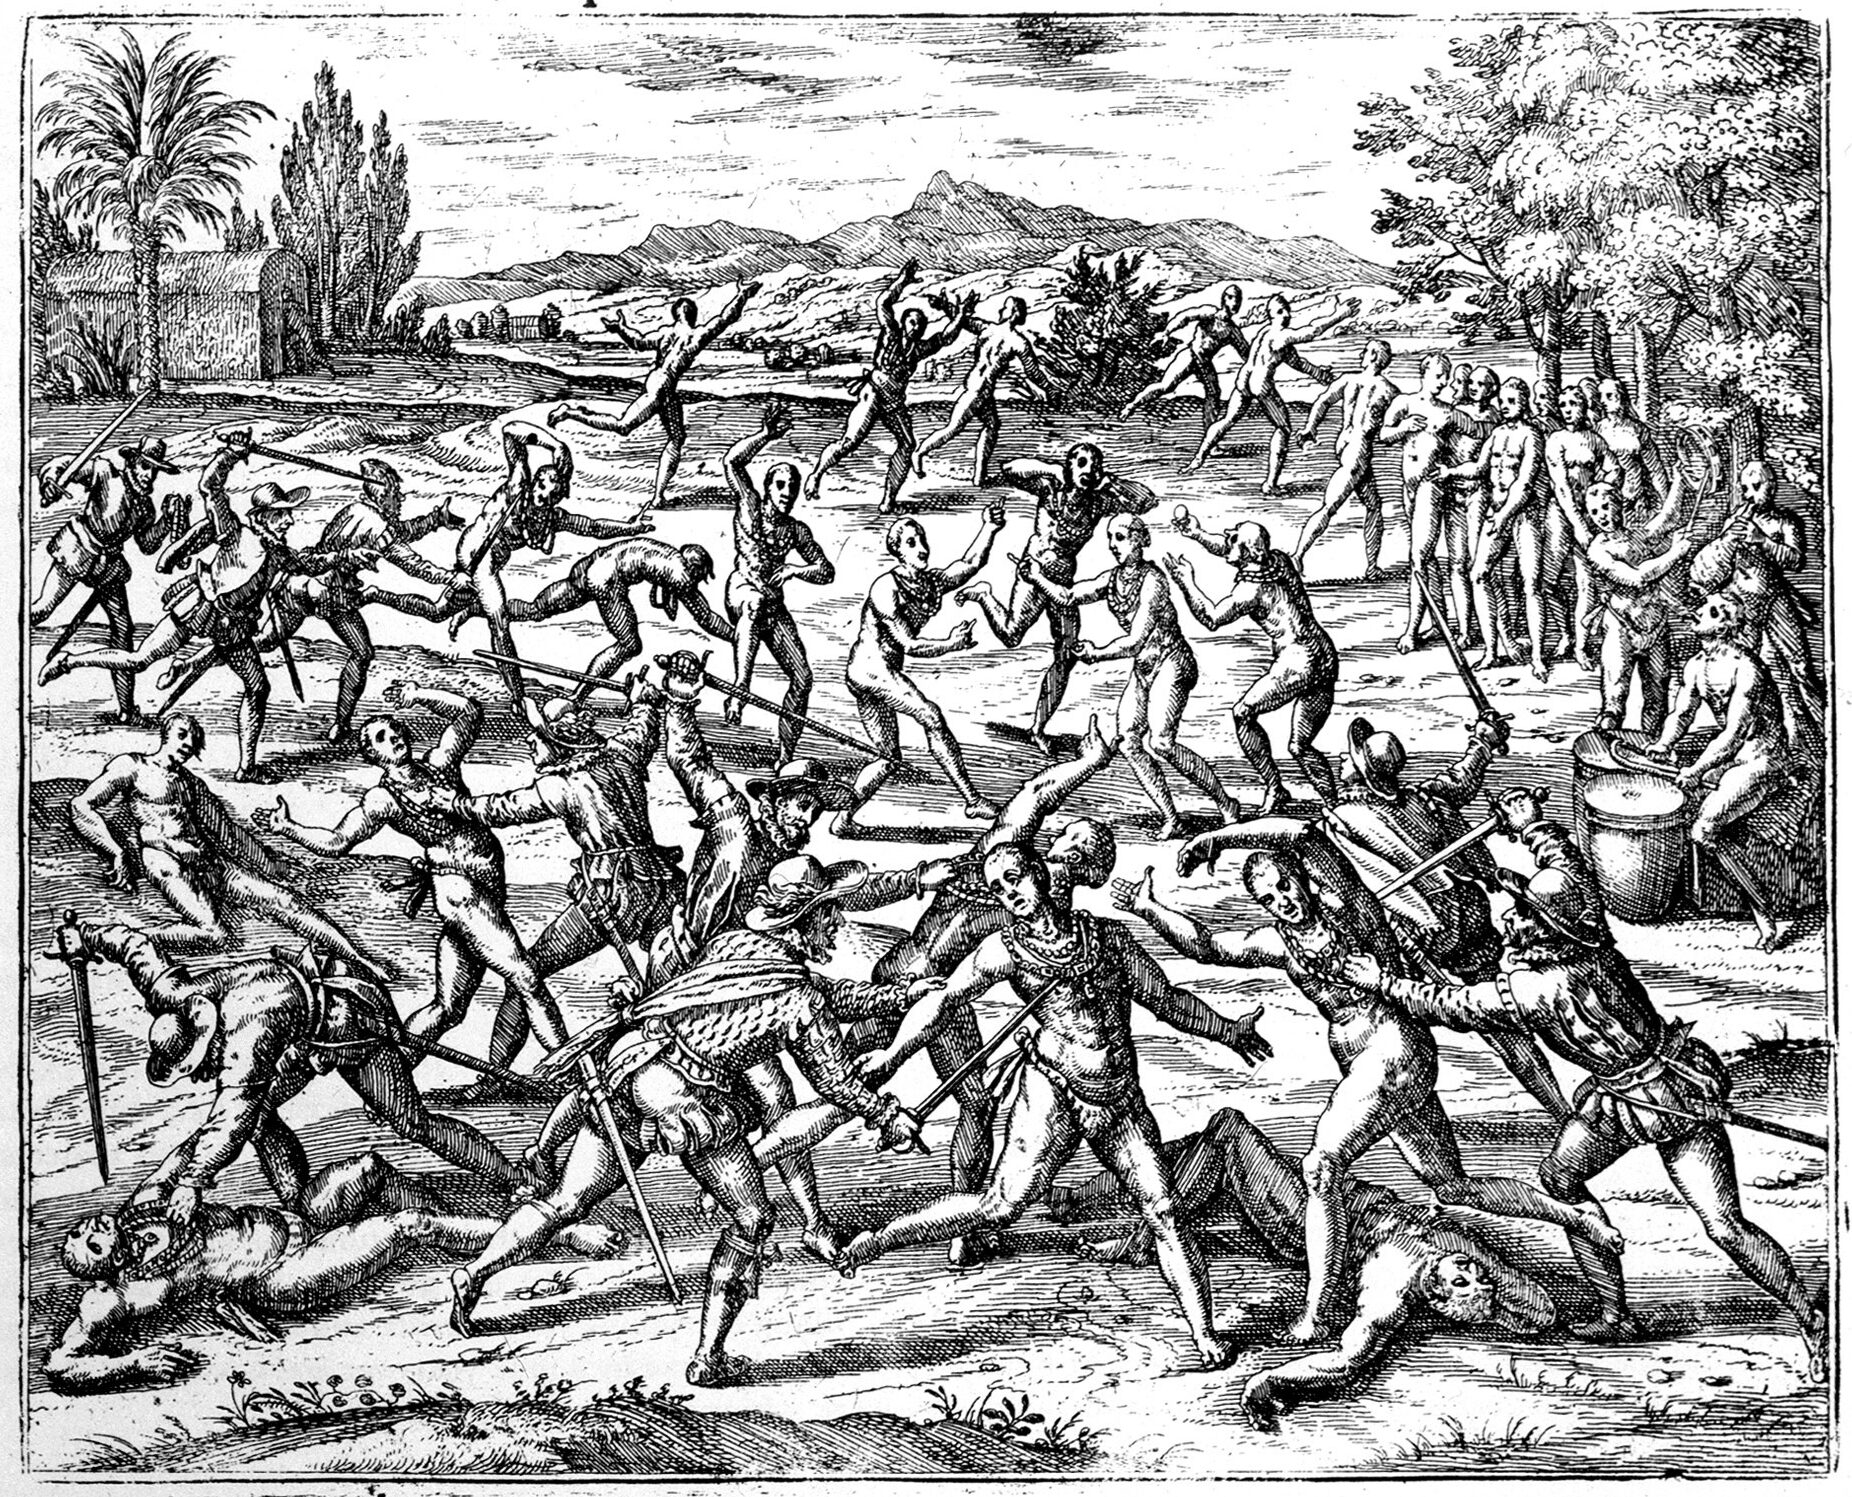 Cortes' second-in-command, Pedro de Alvarado, massacred a large number of Aztecs in spring 1520 during Cortes' absence, thereby igniting a major war between the Aztecs and the Spanish. 